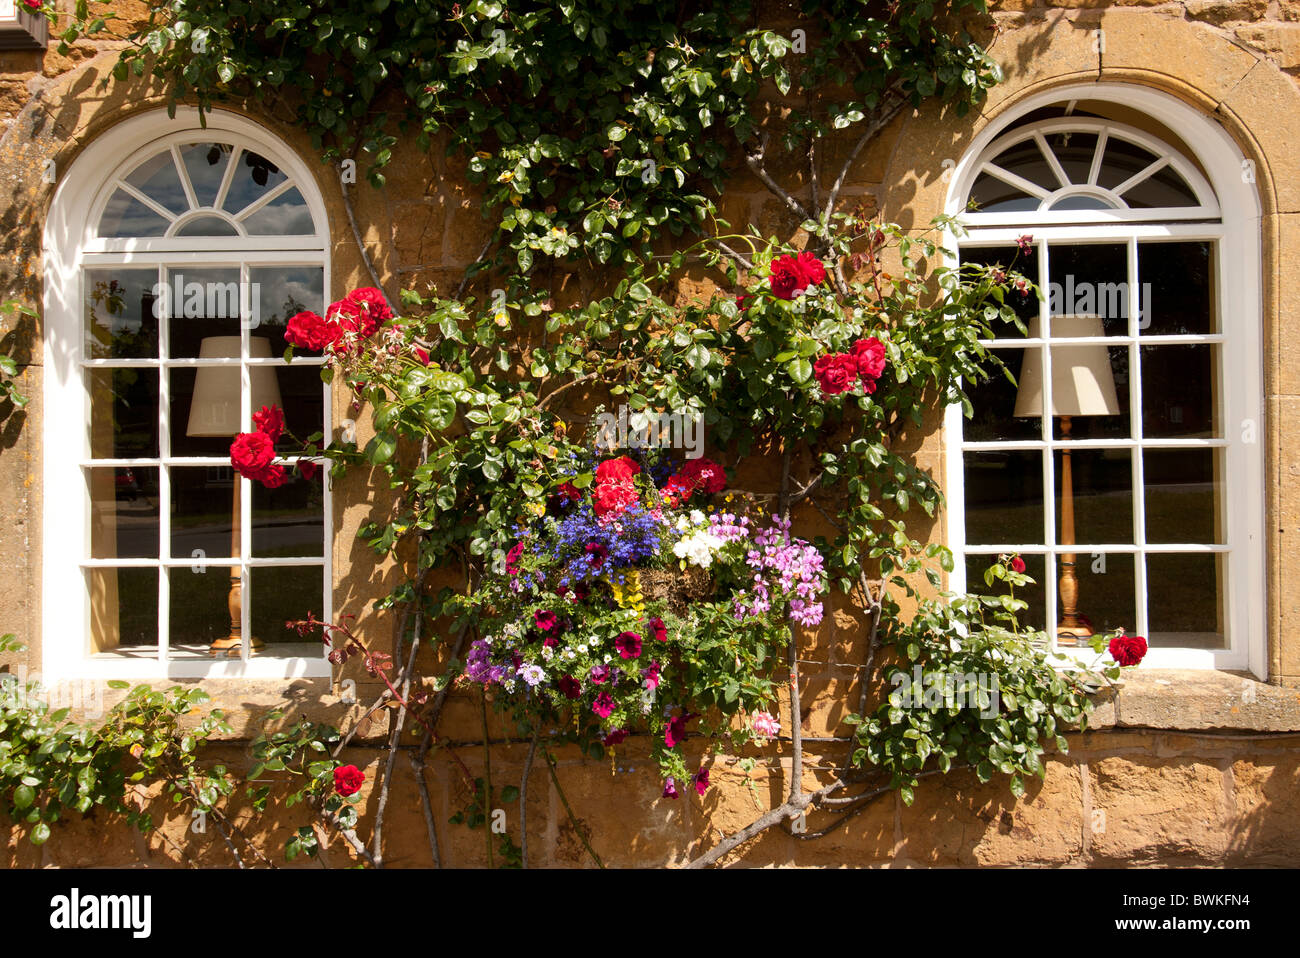 arched windows on house Stock Photo